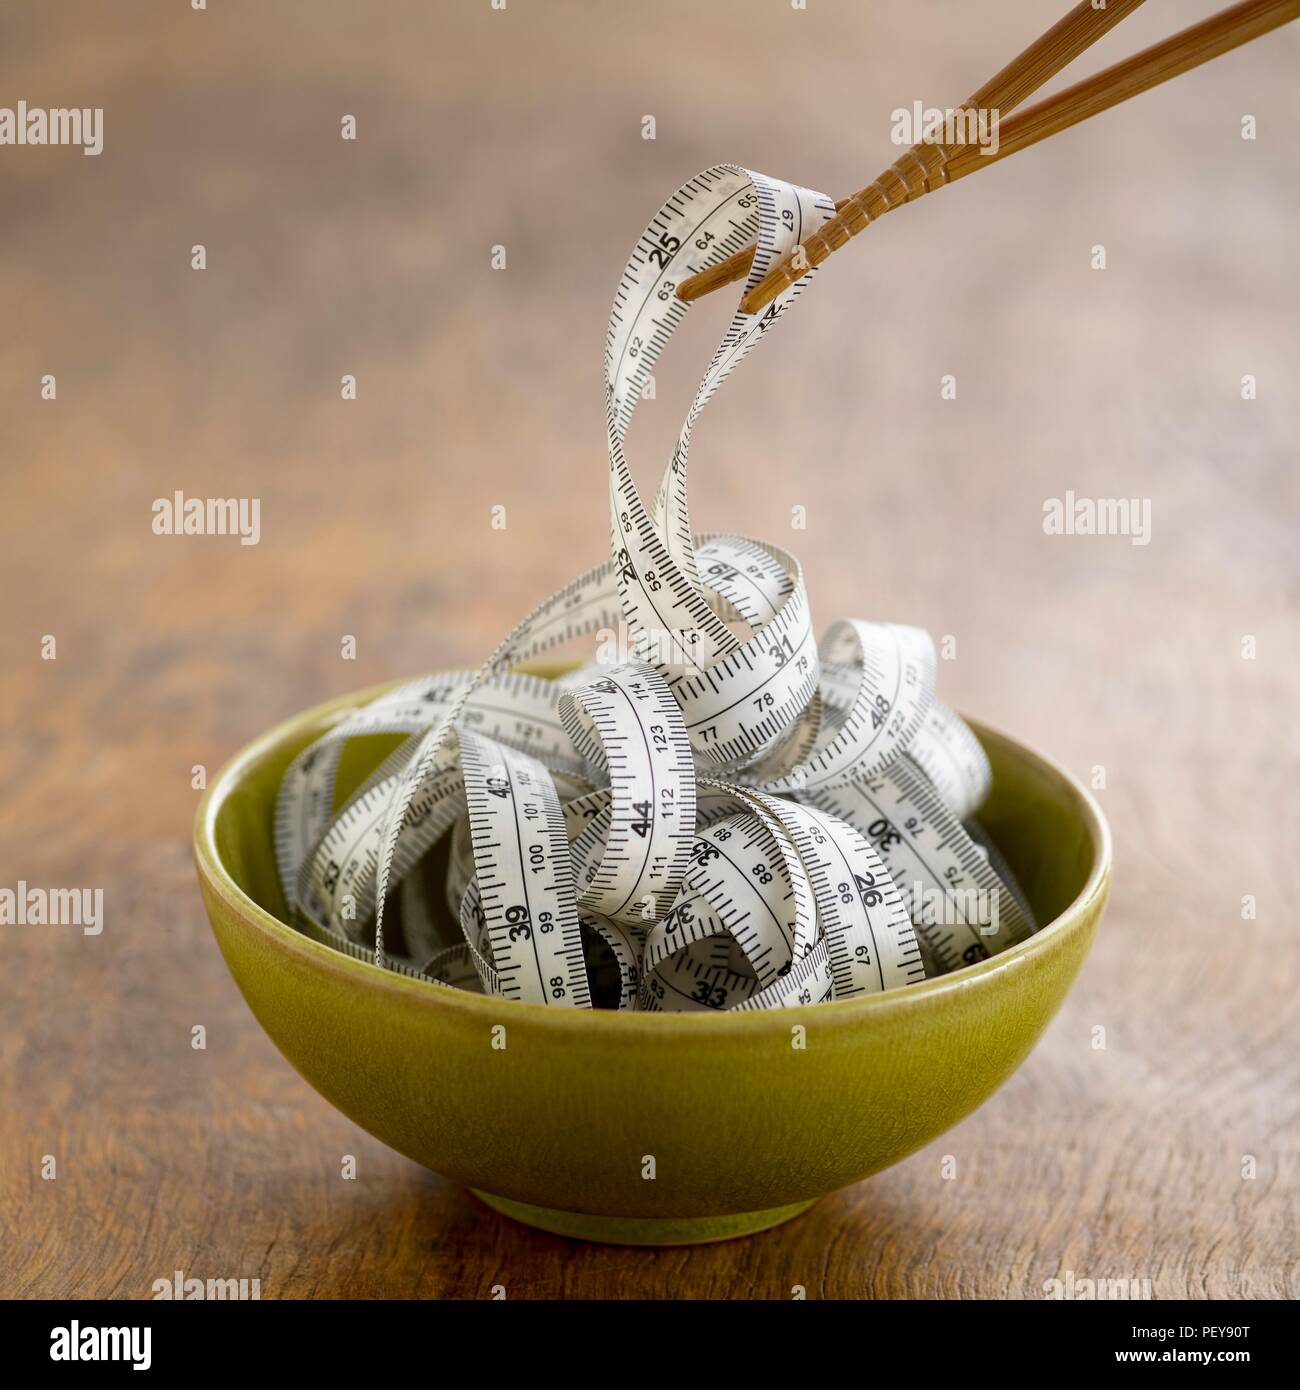 Chinese food bowl with tape measure. Stock Photo